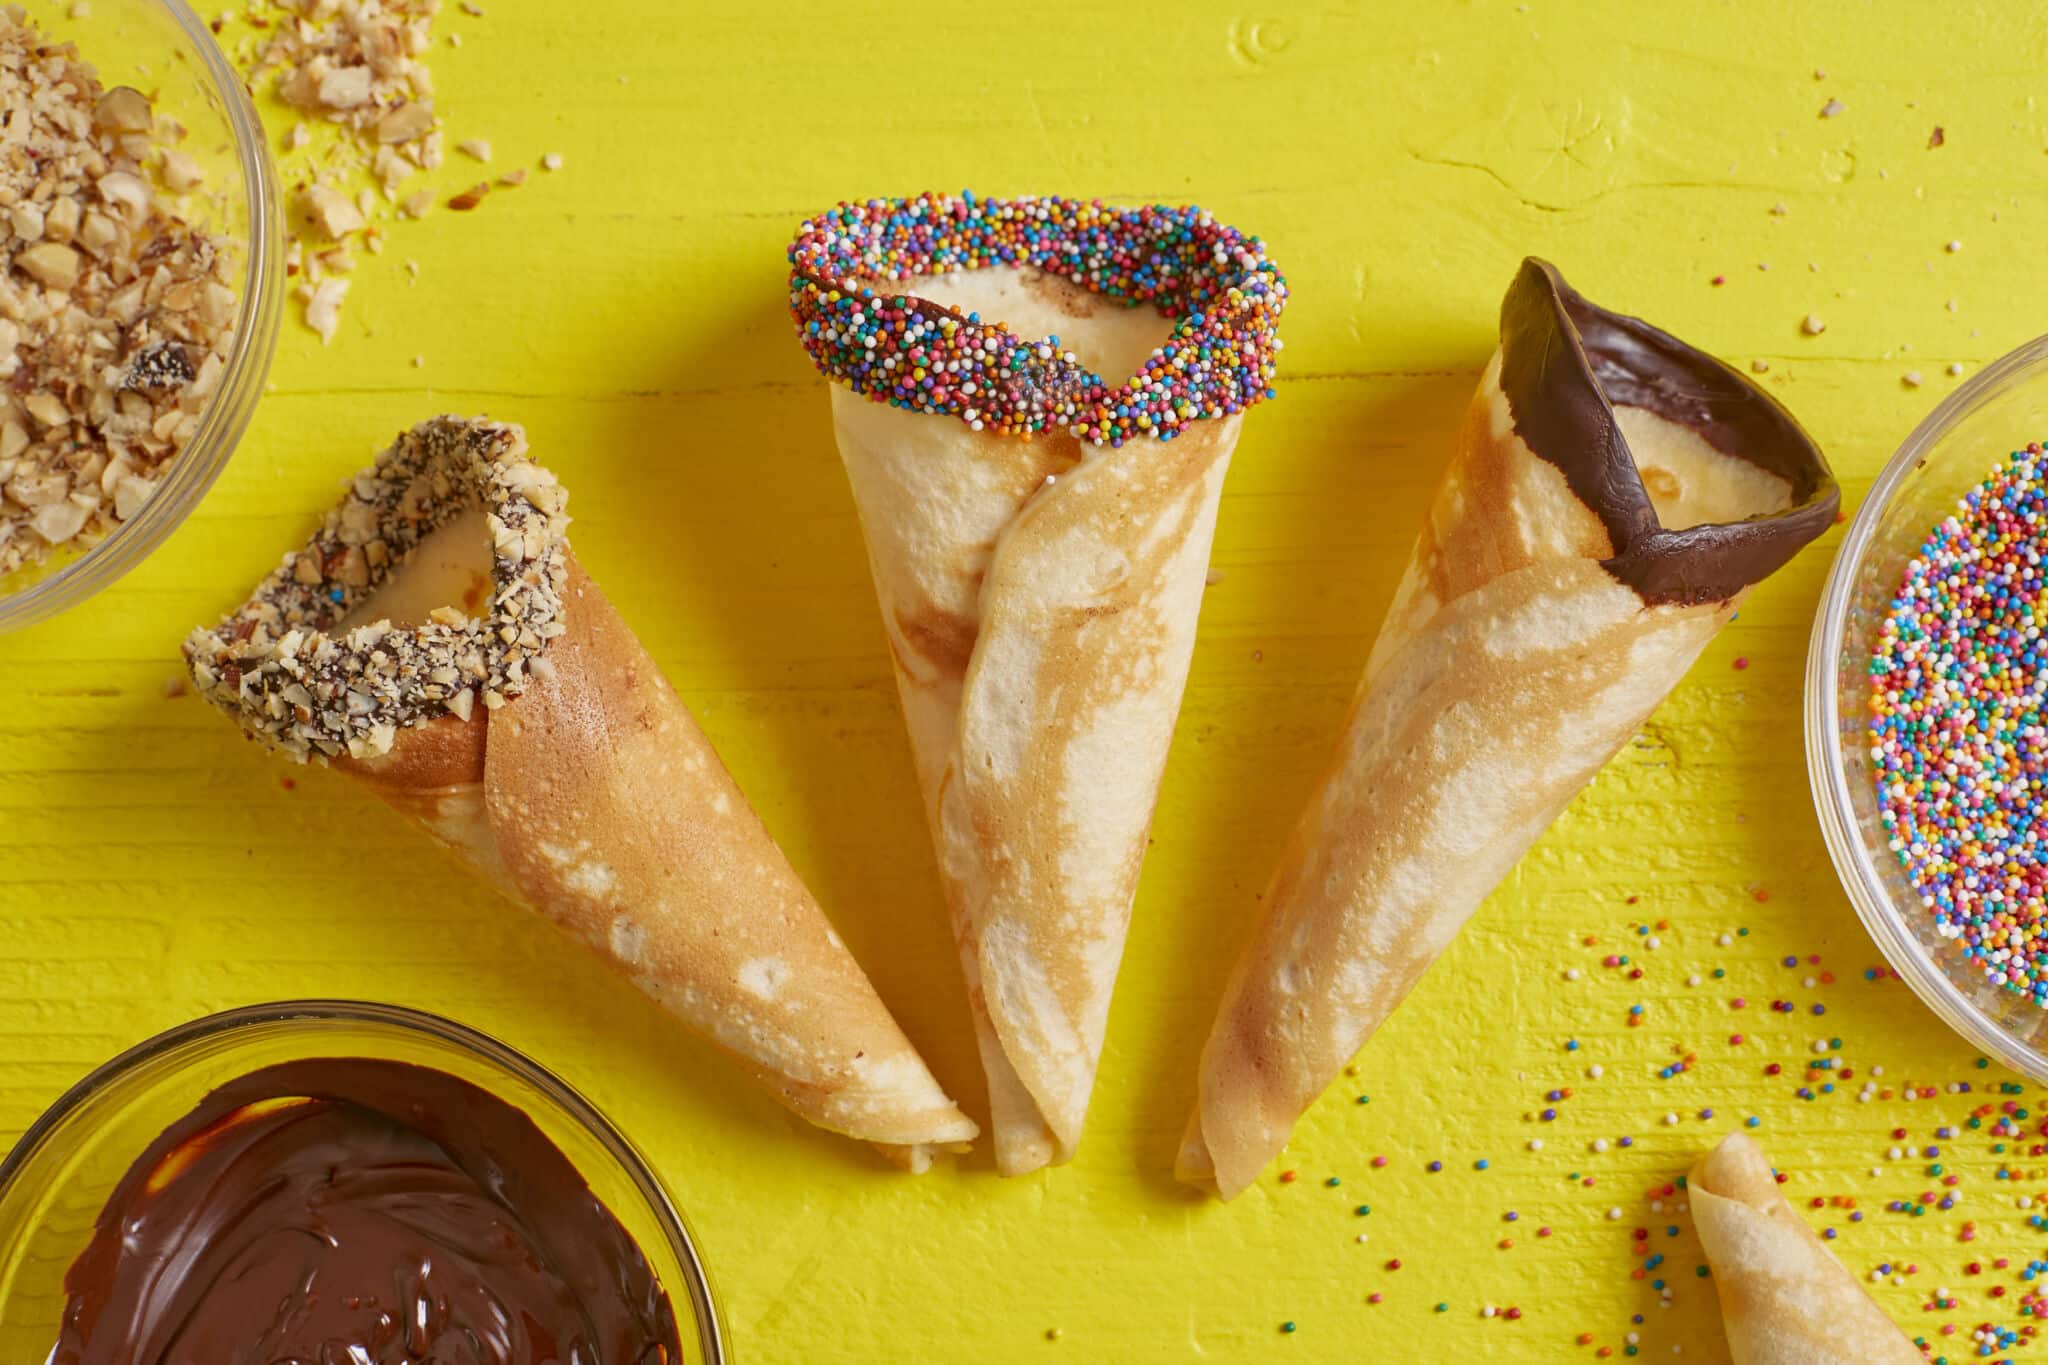 3 Golden crispy buttery ice cream cones dipped in melted chocolate and topped with toasted nuts, sprinkles.